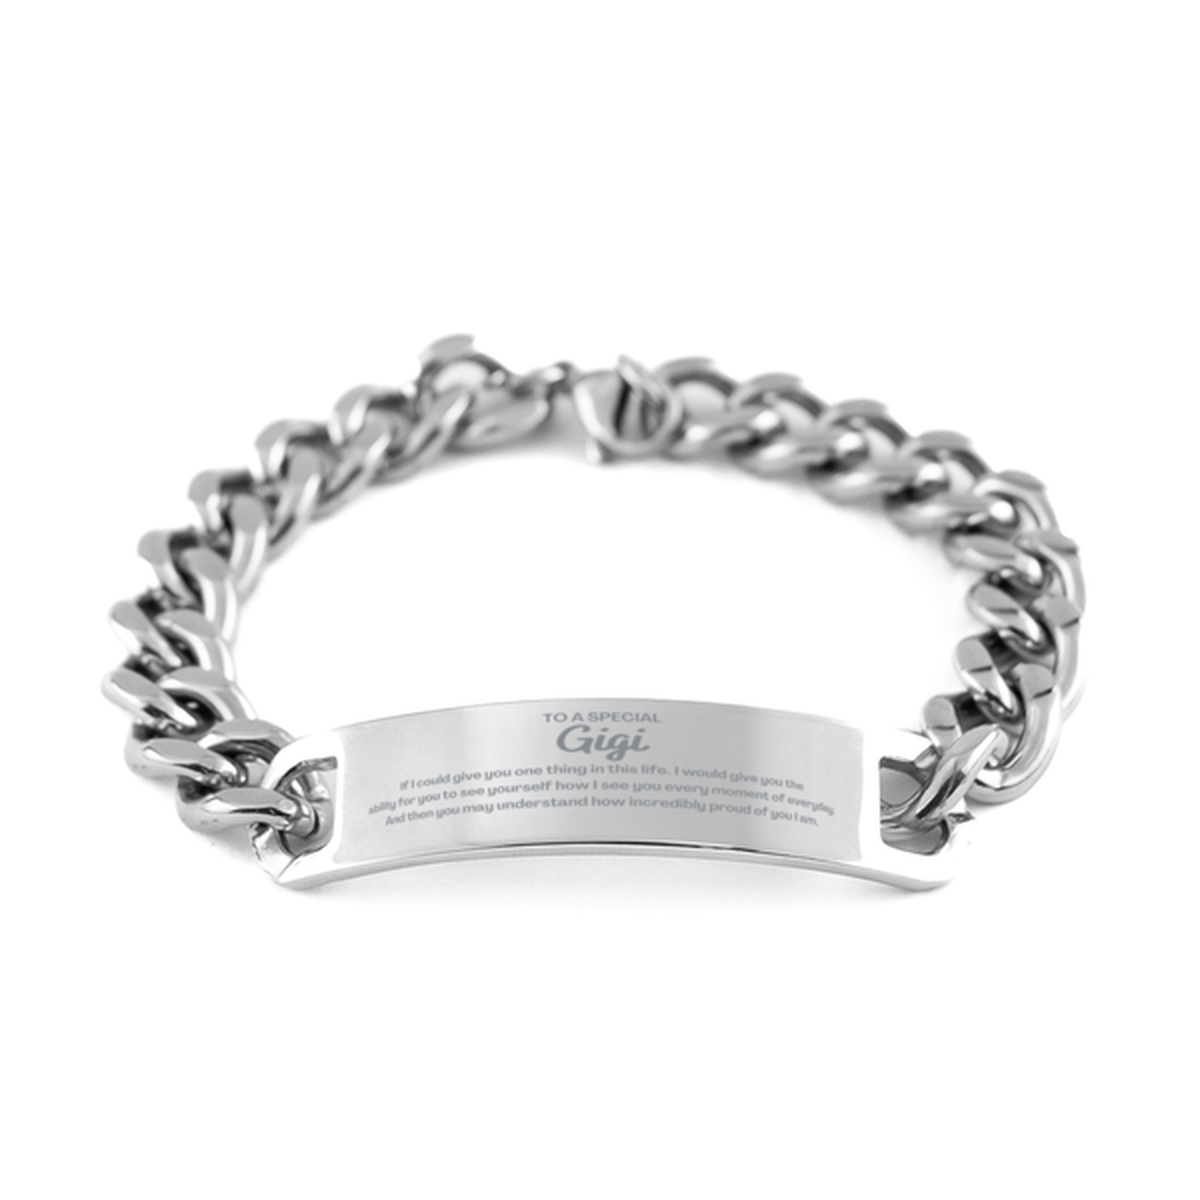 To My Gigi Cuban Chain Stainless Steel Bracelet, Gifts For Gigi Engraved, Inspirational Gifts for Christmas Birthday, Epic Gifts for Gigi To A Special Gigi how incredibly proud of you I am